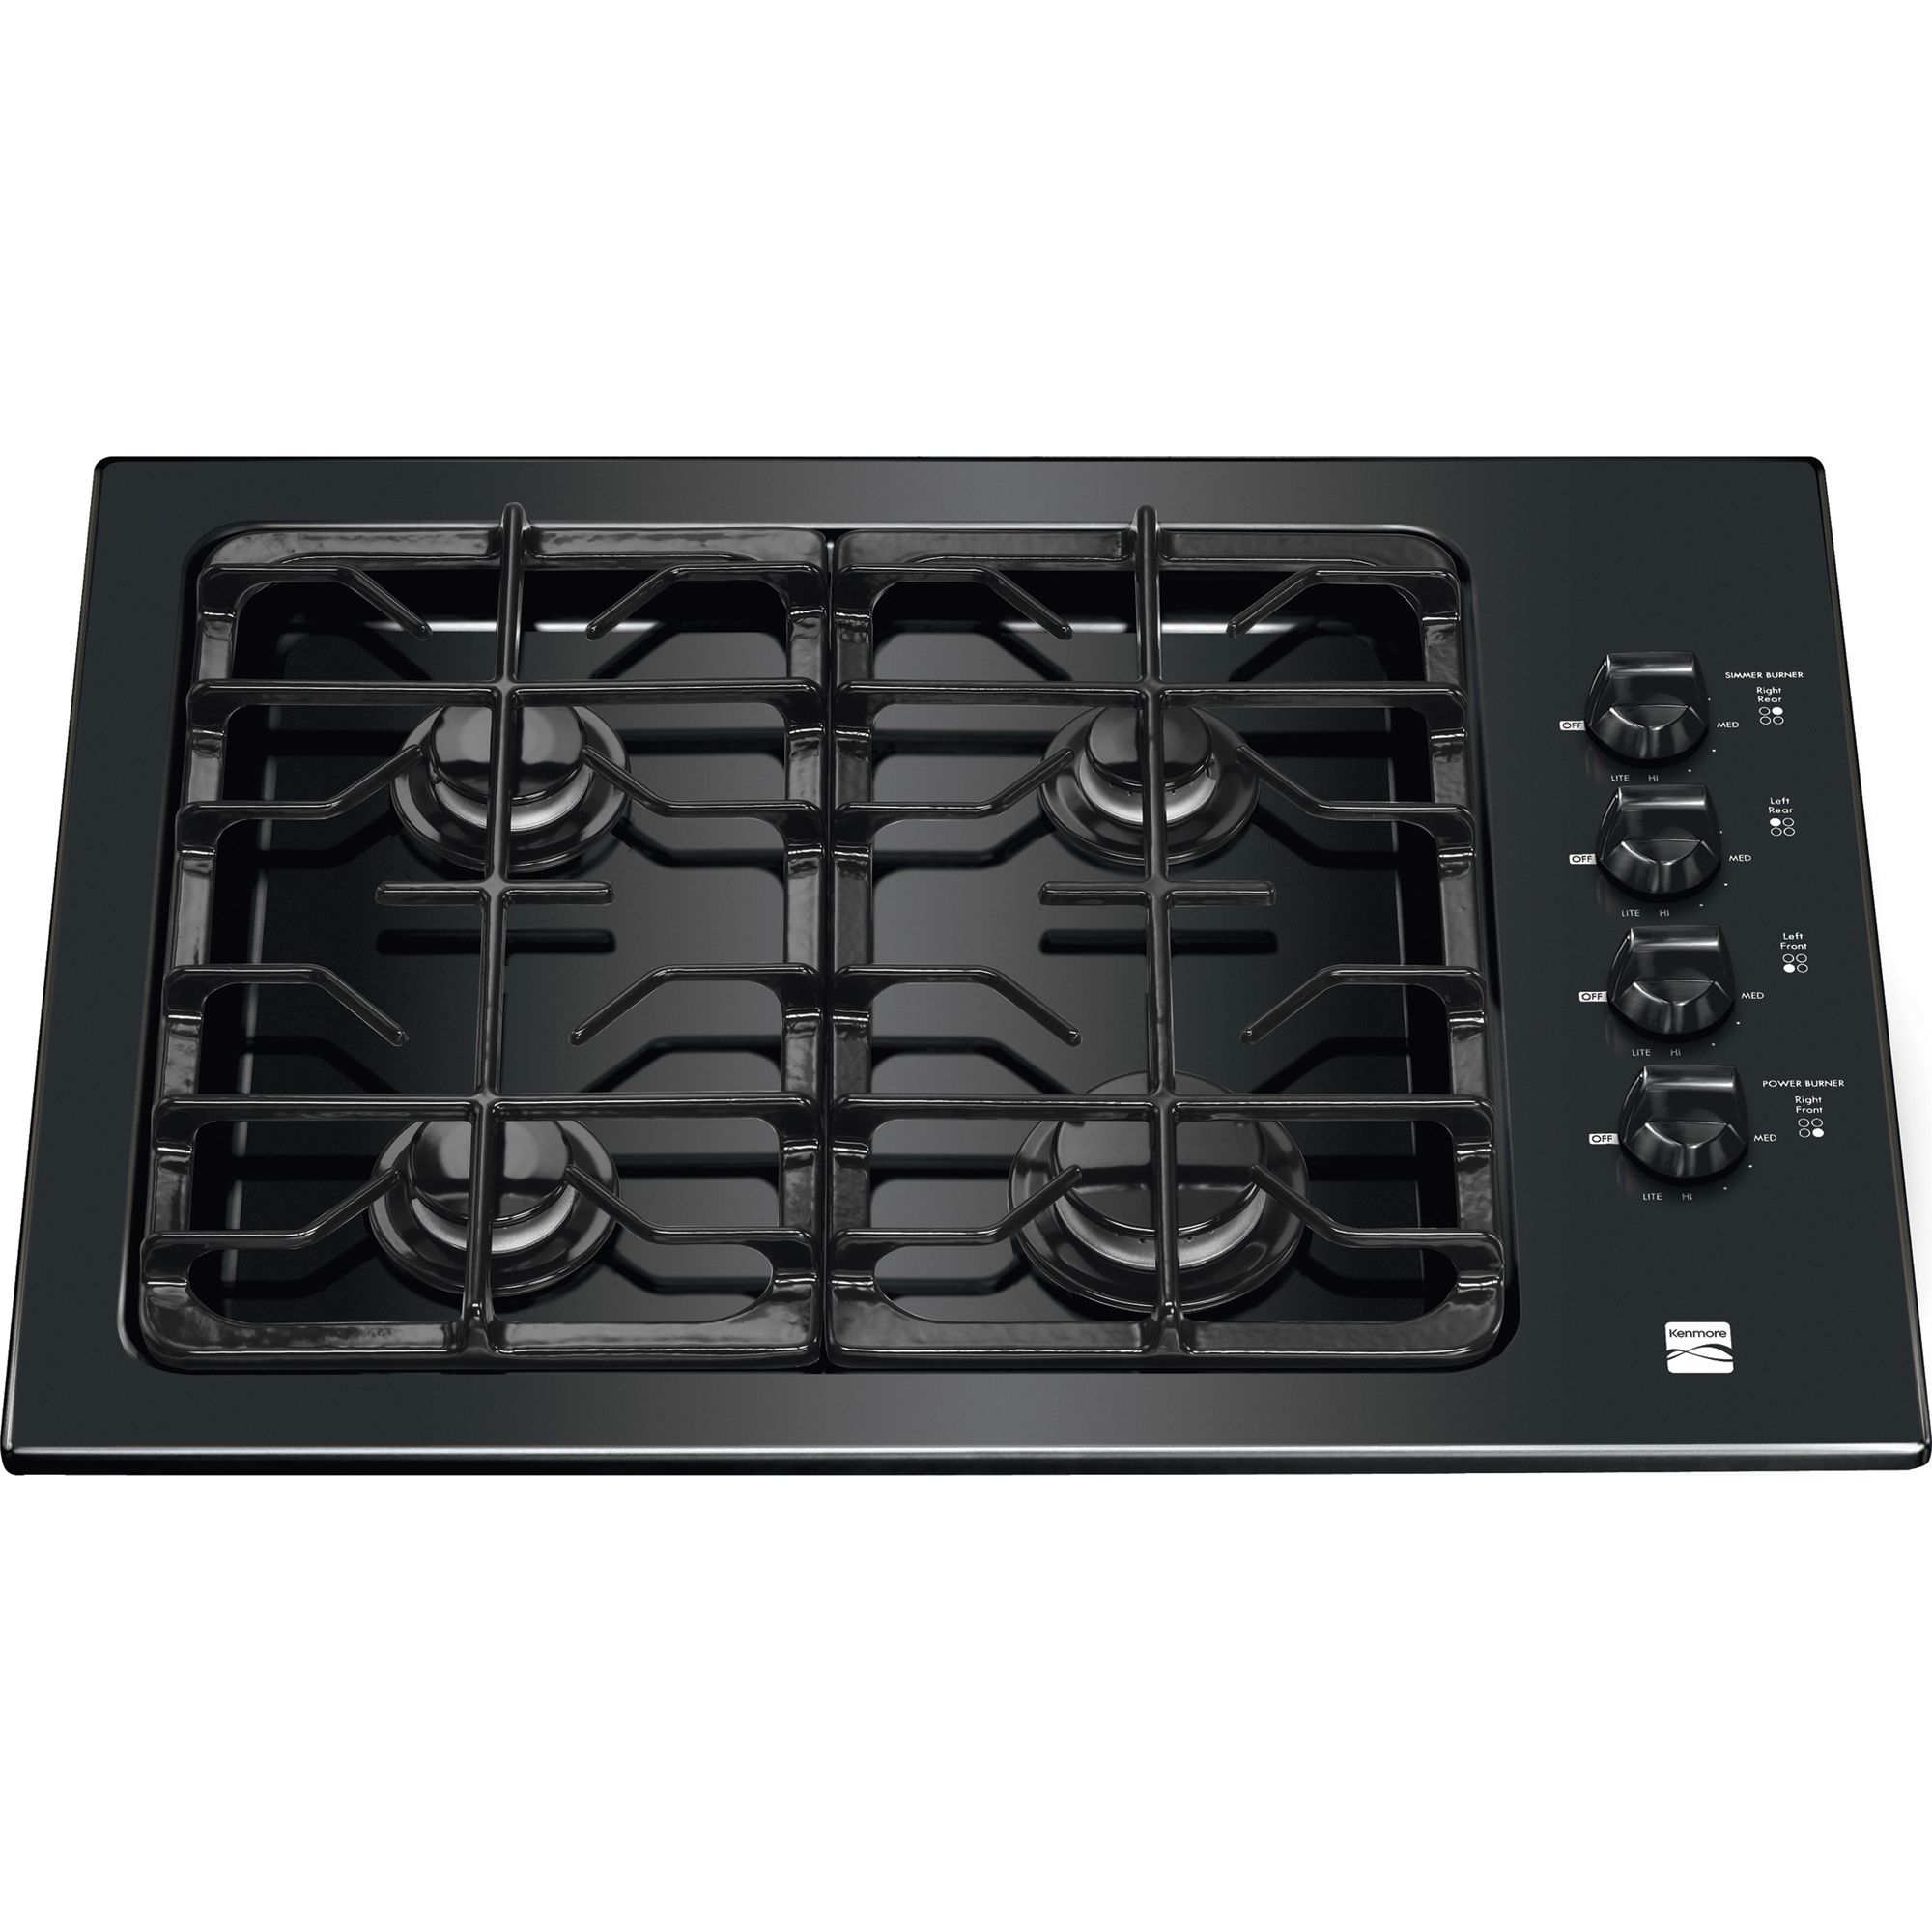 Kenmore glass cooktop replacement black brand new in